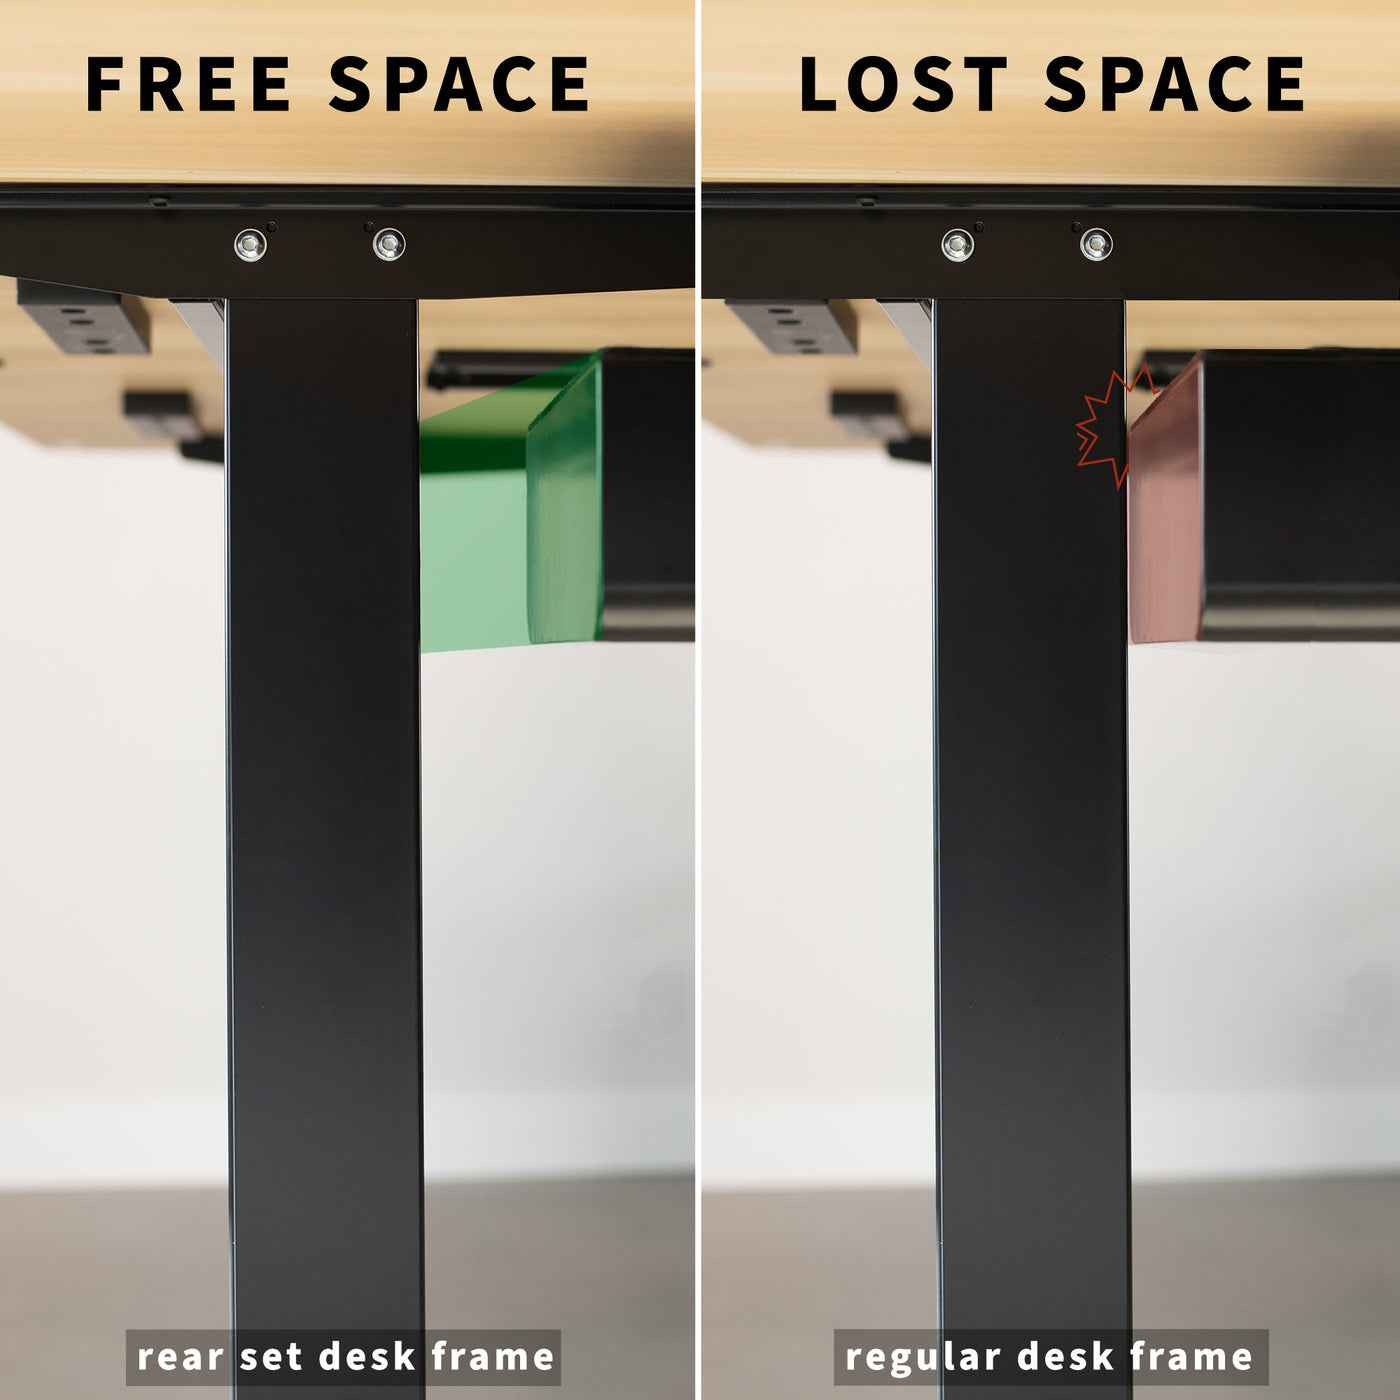  Create more free space with a rear set desk frame.